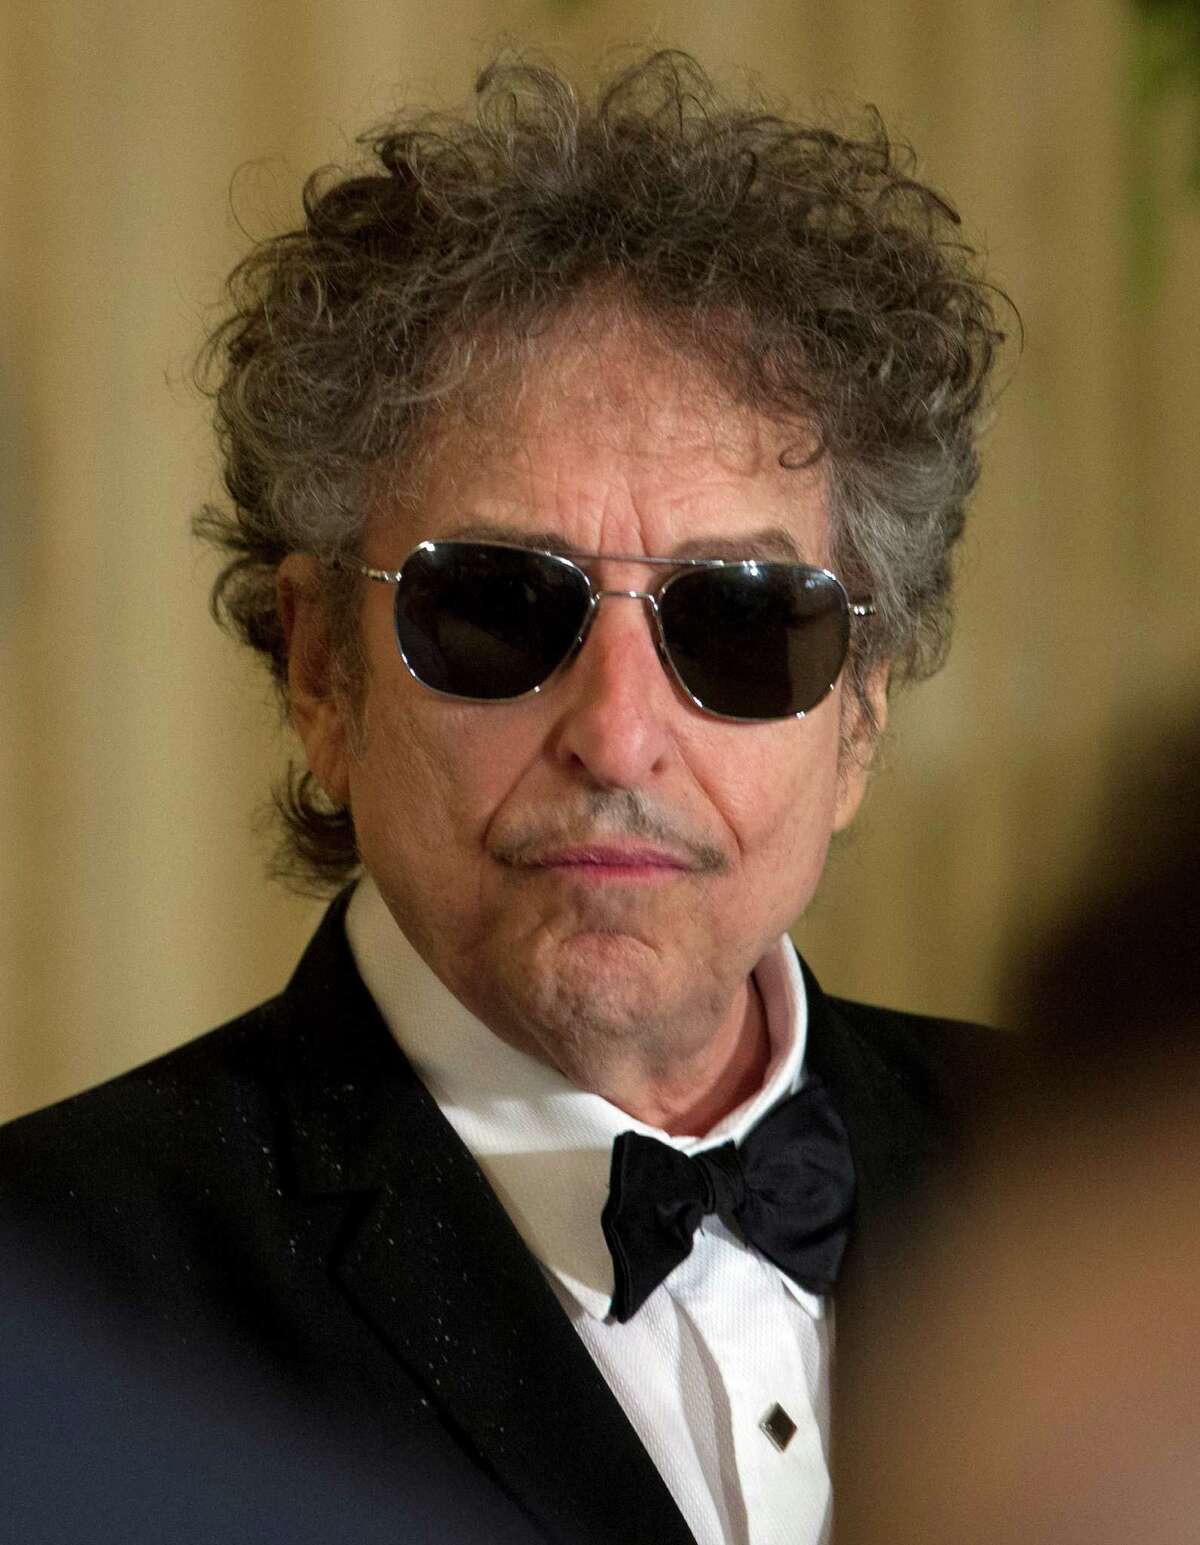 Bob Dylan arrives for a ceremony to receive the Presidential Medal of Freedom in the East Room of the White House, Tuesday, May 29, 2012, in Washington. (AP Photo/Carolyn Kaster)